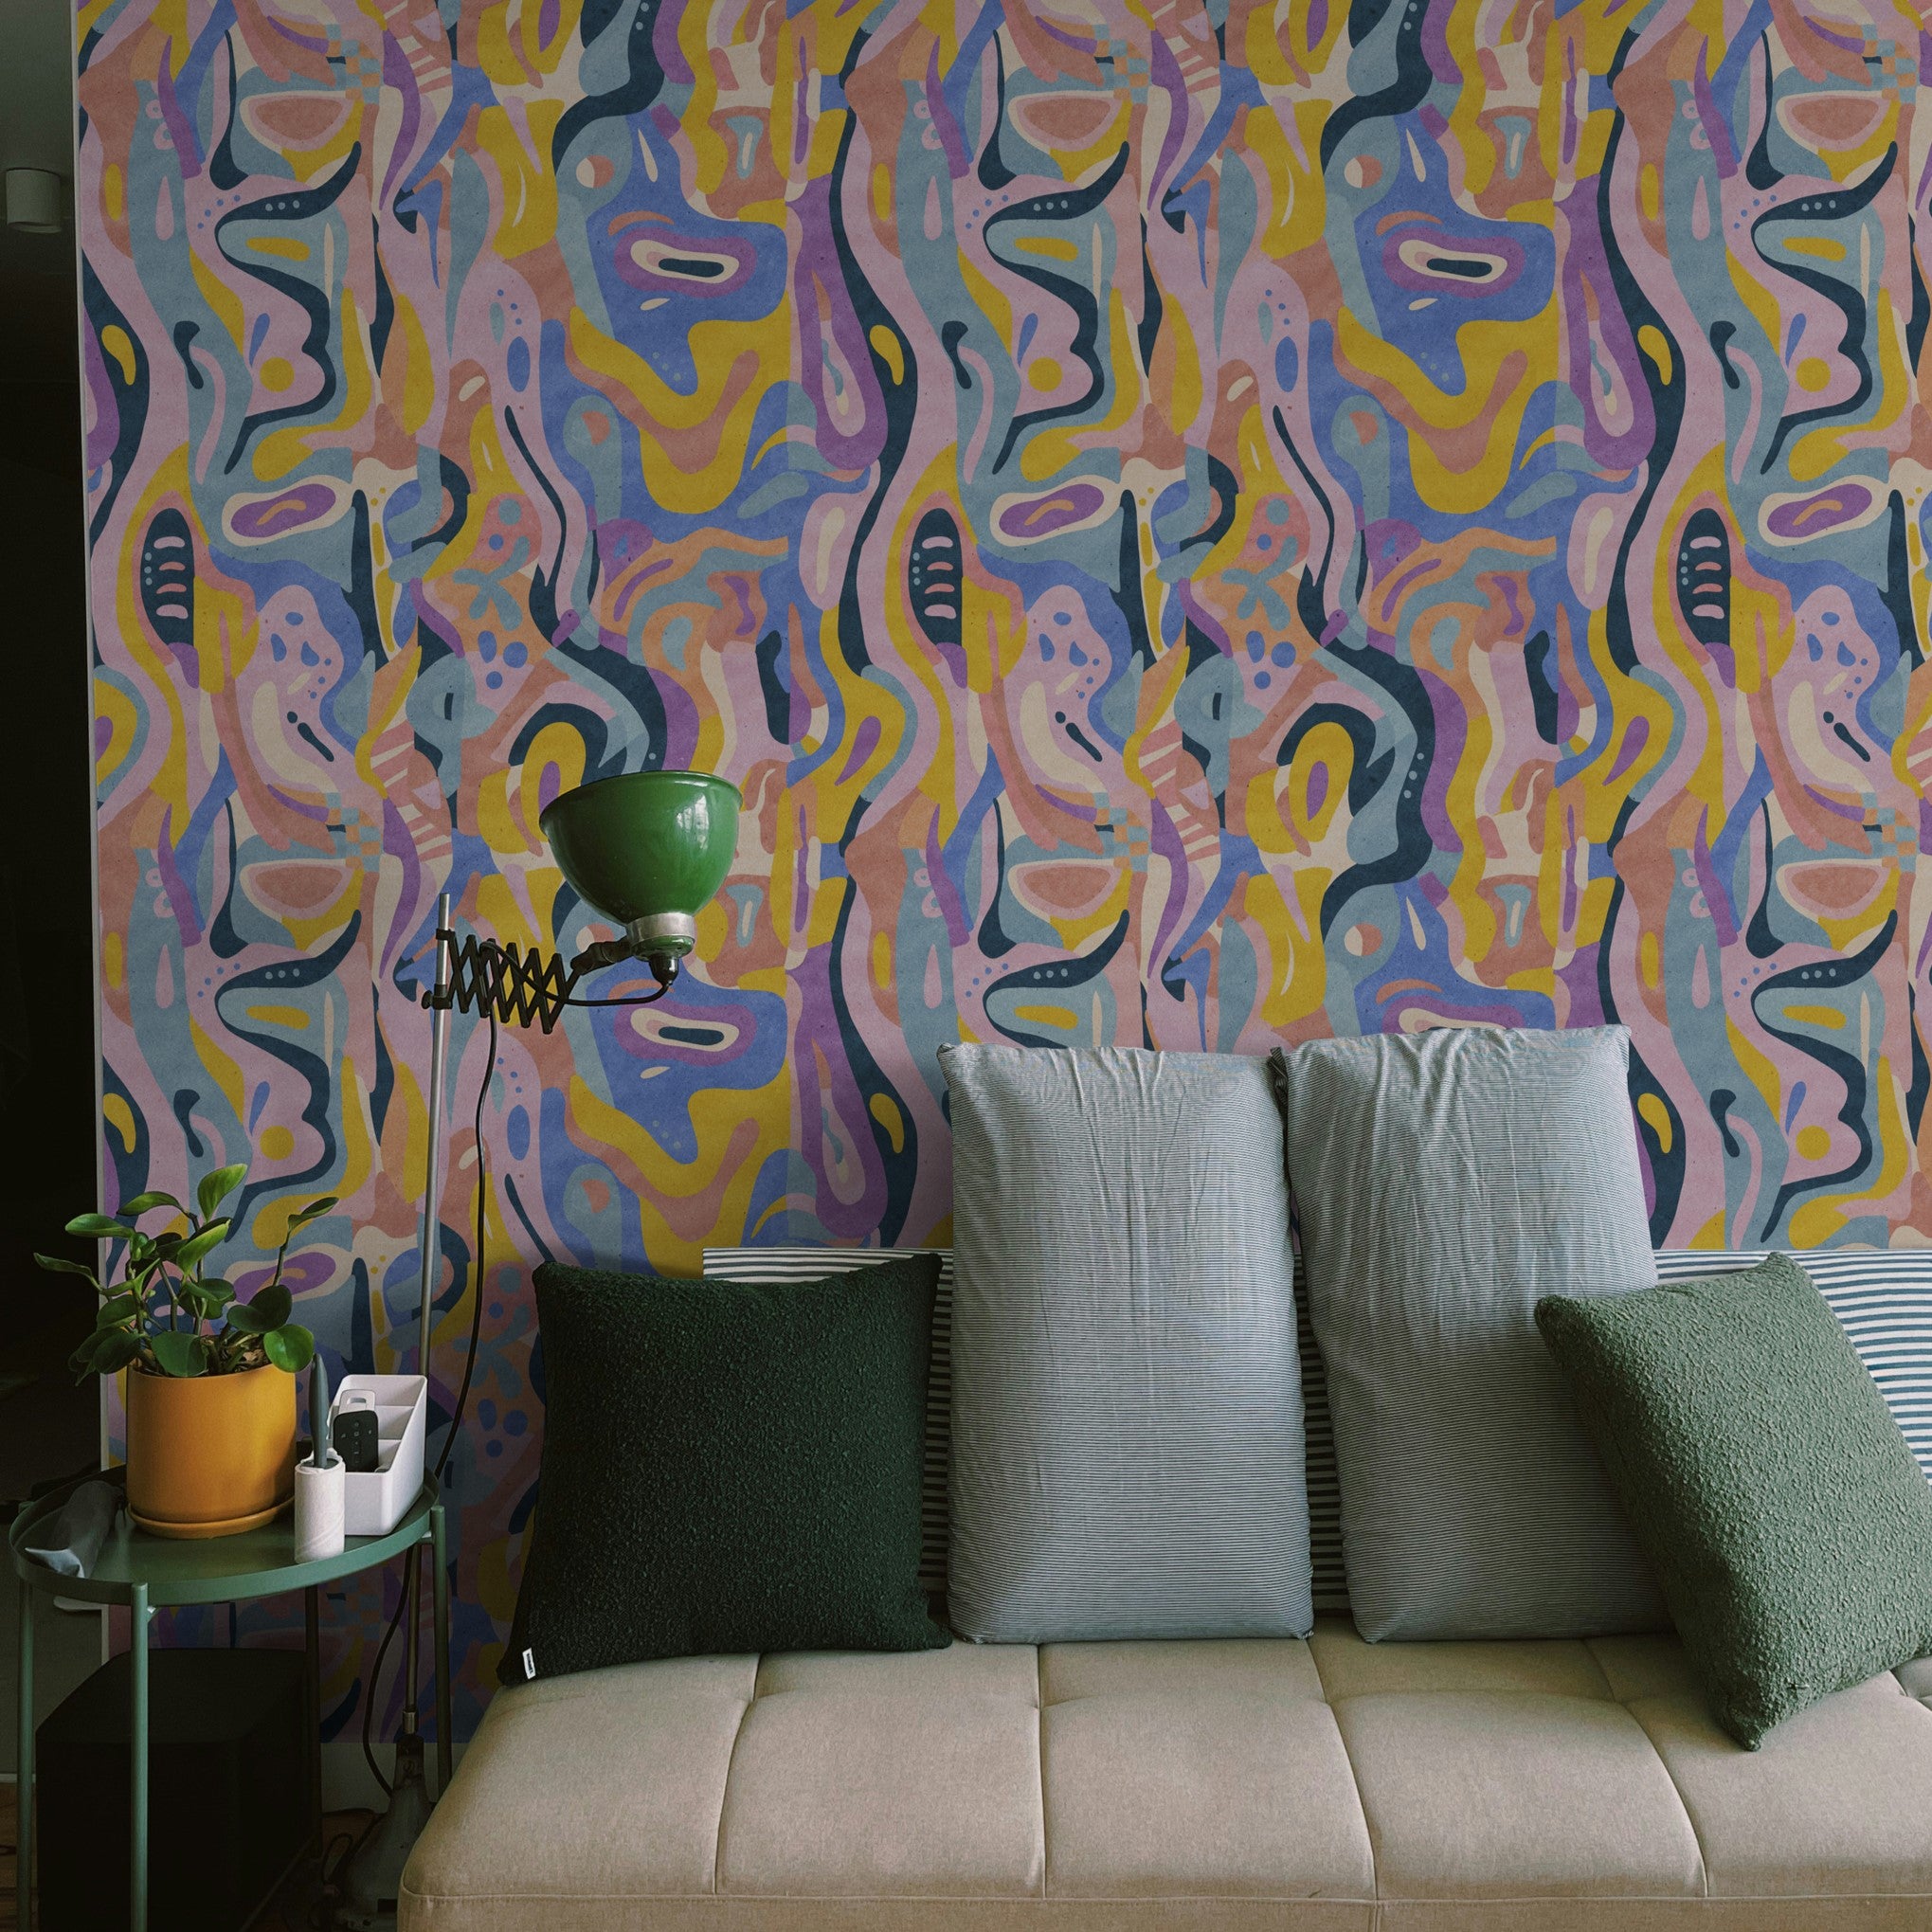 "Funky Town Wallpaper by Wall Blush in a cozy living room, accentuating vibrant wall decor focus."